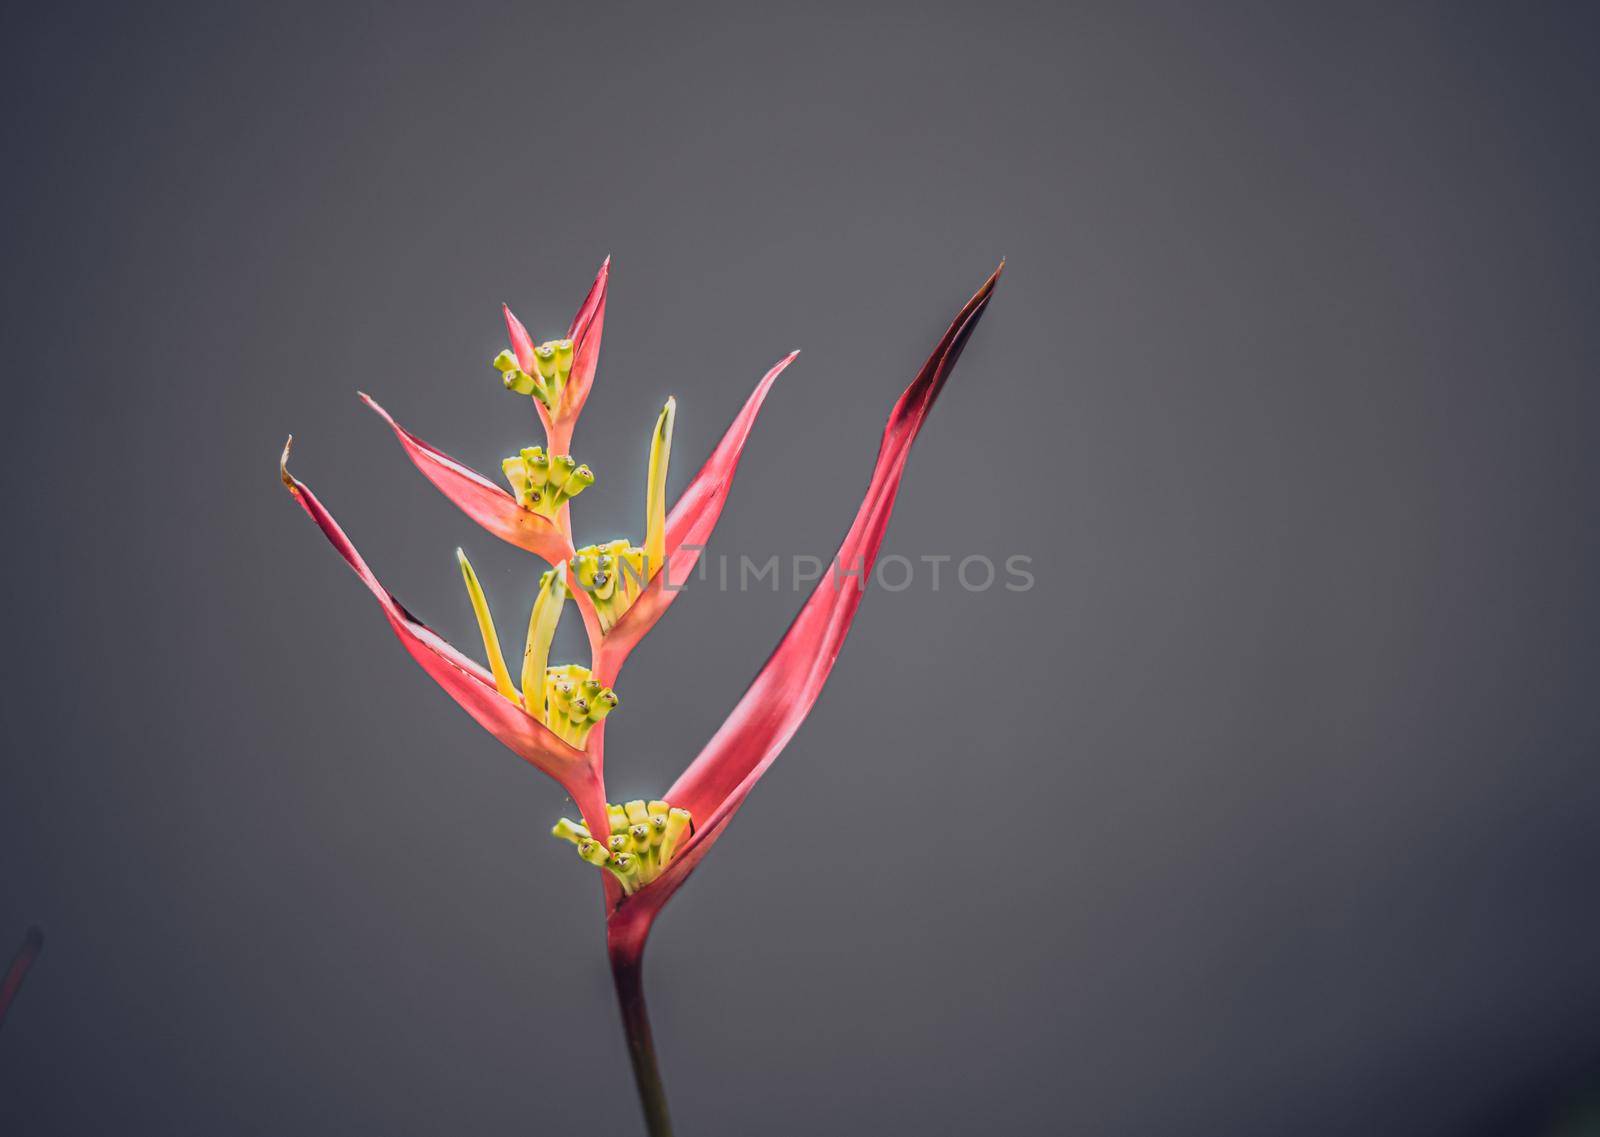 Real beauty nature. Strelitzia, bird of paradise, crane lily plant. Red pink blossom tropical exotic unic flower narrow petal yellow bloom. Light gray background. Copy space. Botanic floral design.